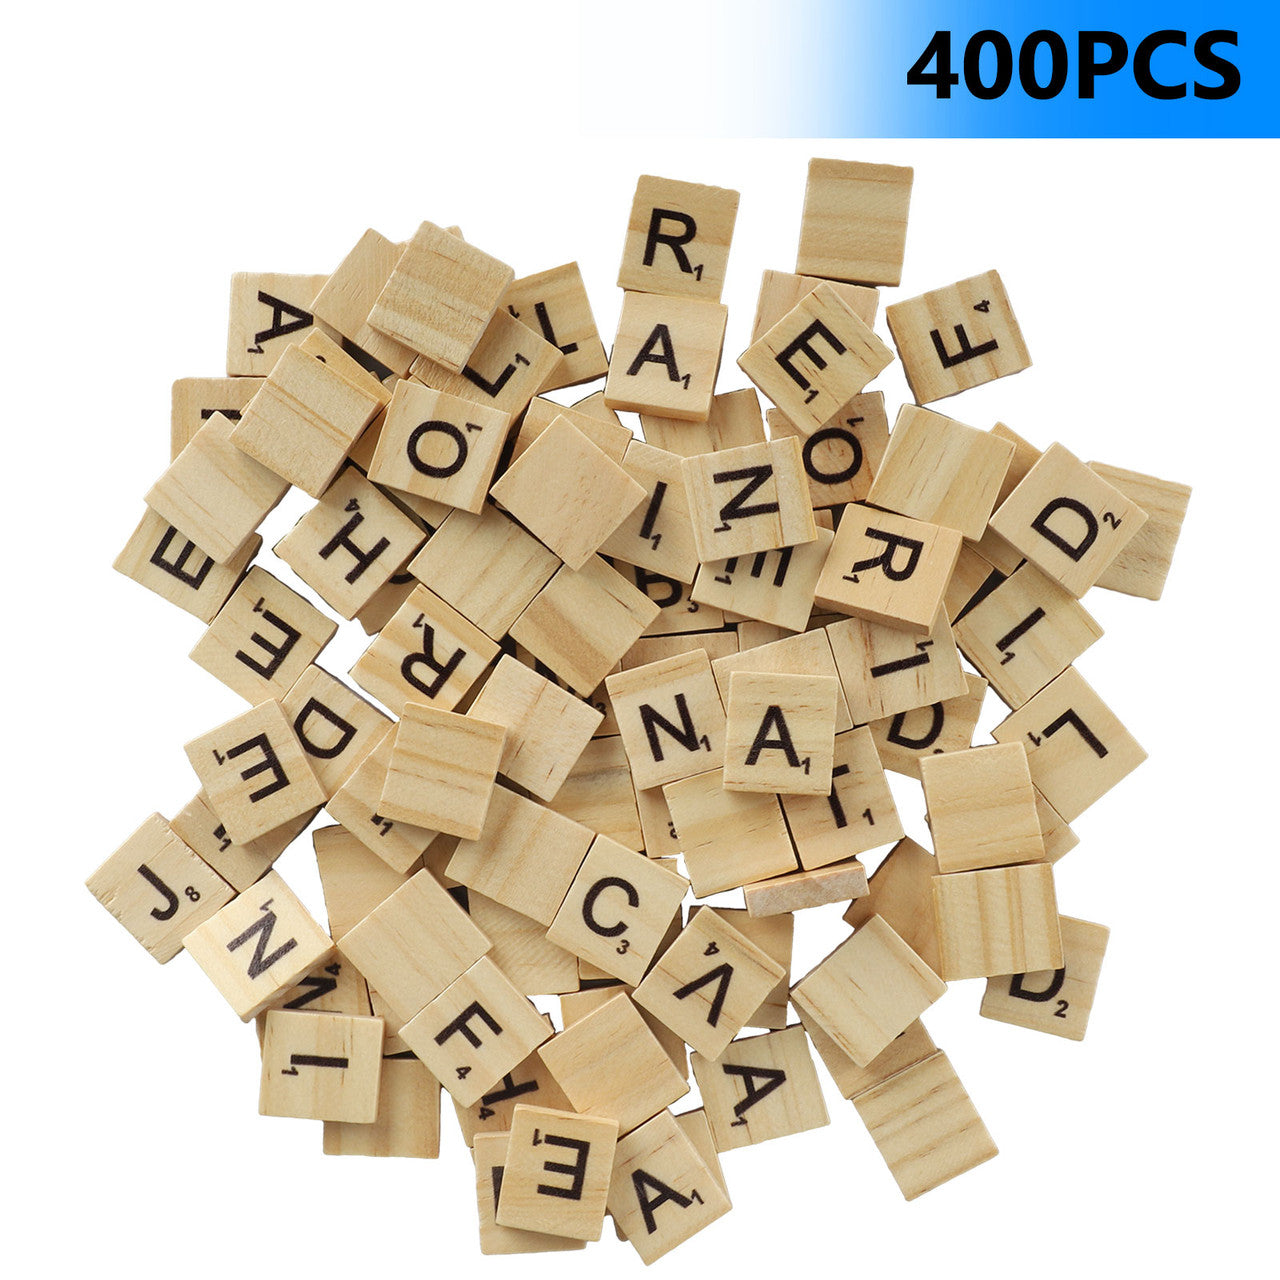 Wood Letter Tiles, Scrabble Letters for Crafts, A-Z Capital Letters for Crafts Spelling, DIY Wood Gift Decoration, Making Alphabet Coasters and Scrabble Crossword Game, 4Pcs